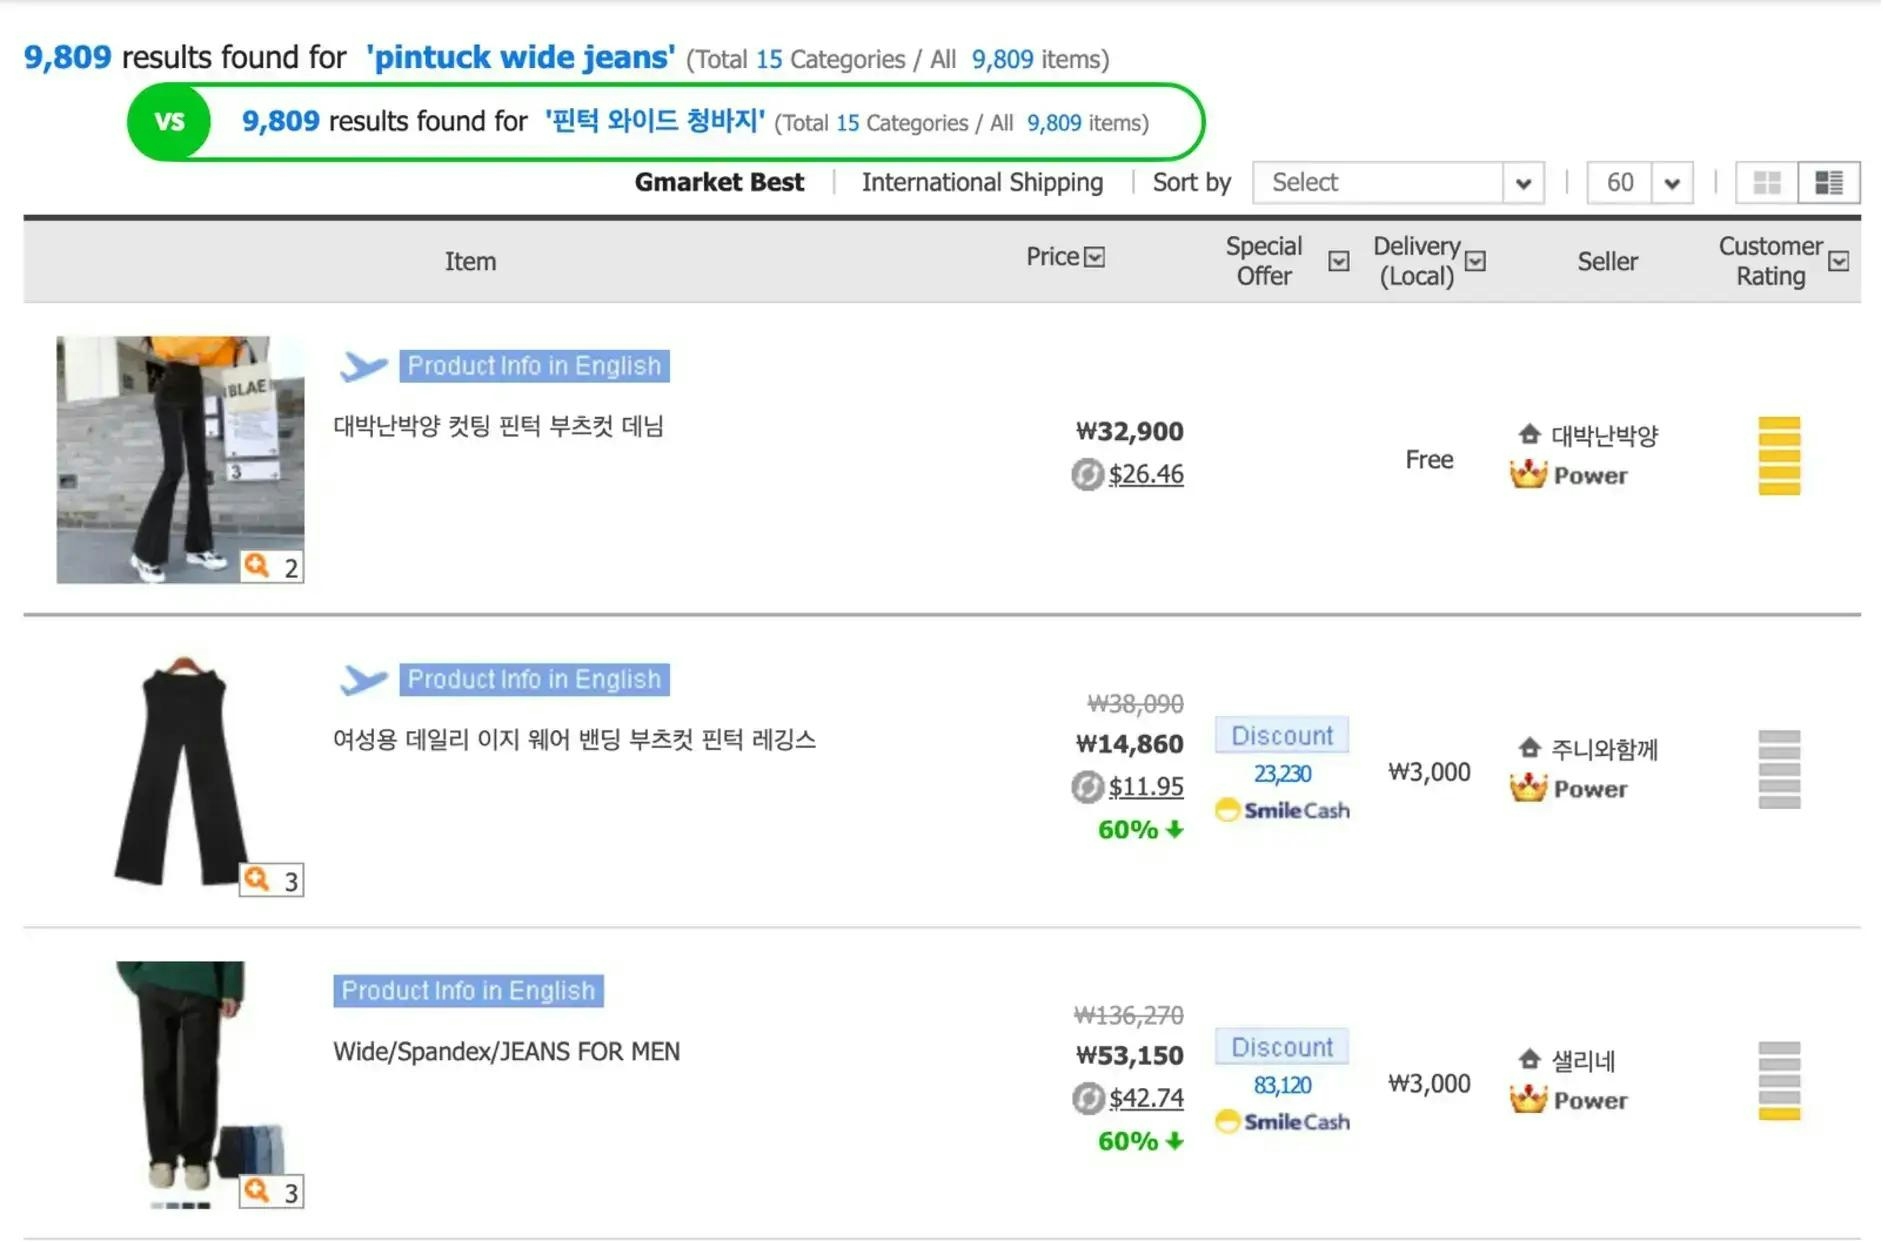 Gmarket search results for Pintuck Wide Jeans